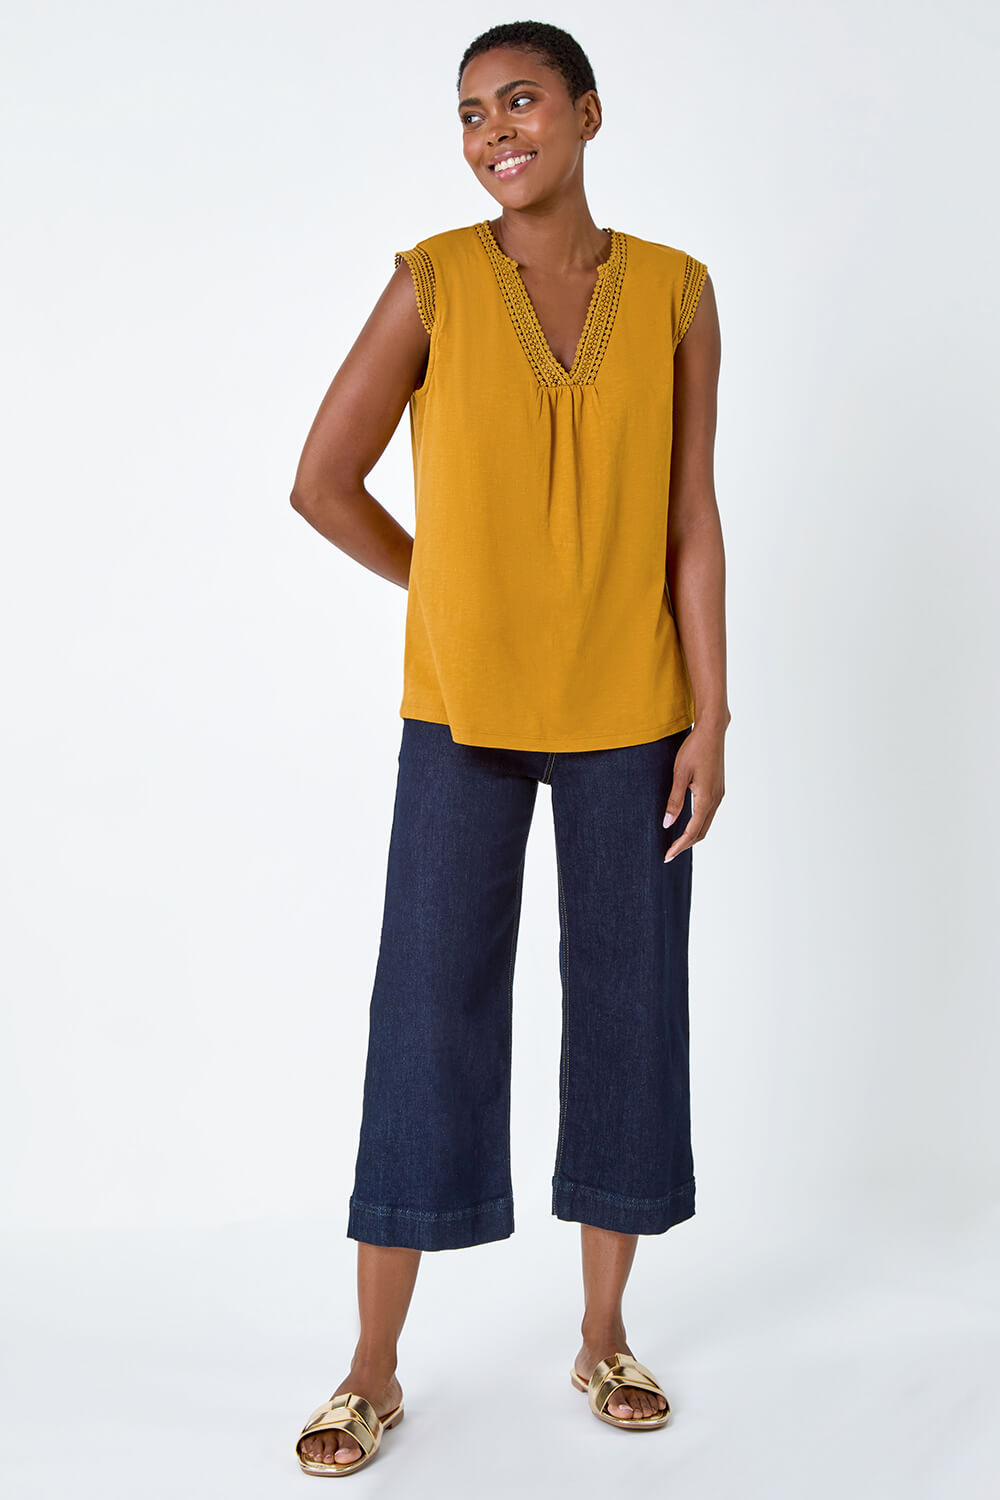 Ochre Sleeveless Lace Trim Cotton Top, Image 2 of 5